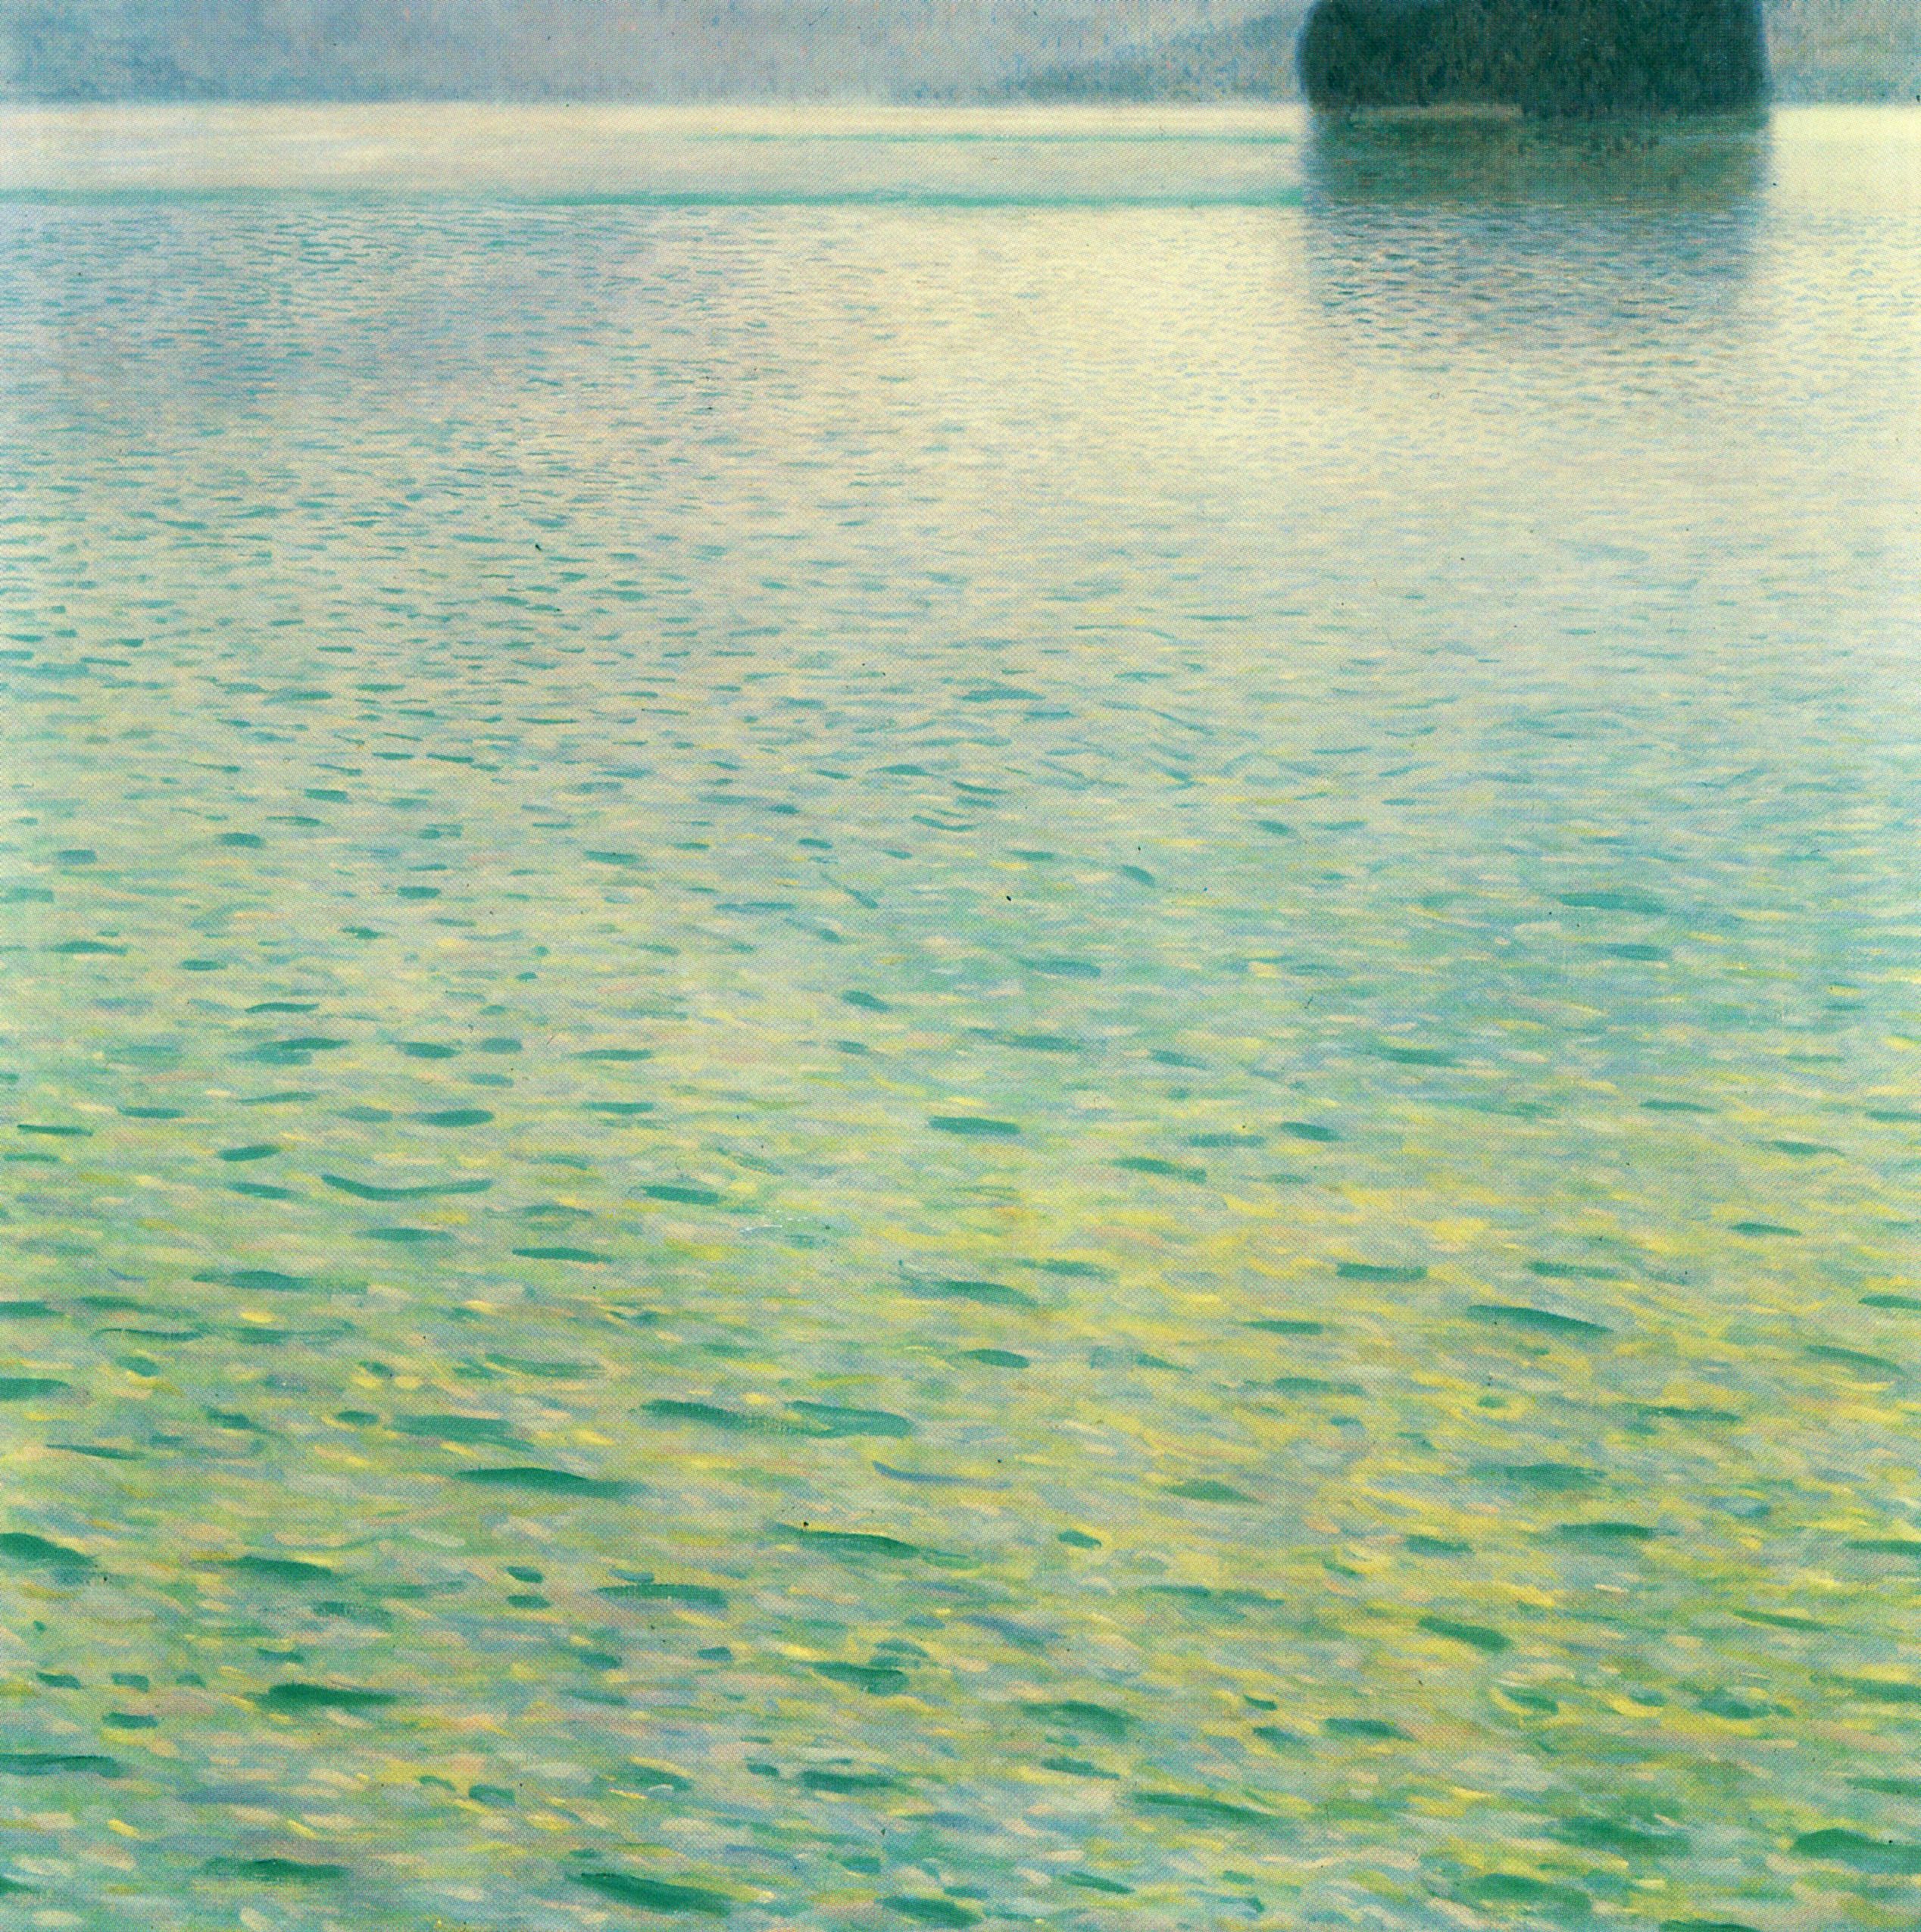 Island in the Attersee by Gustav Klimt - 1901 - 100 x 100 cm private collection